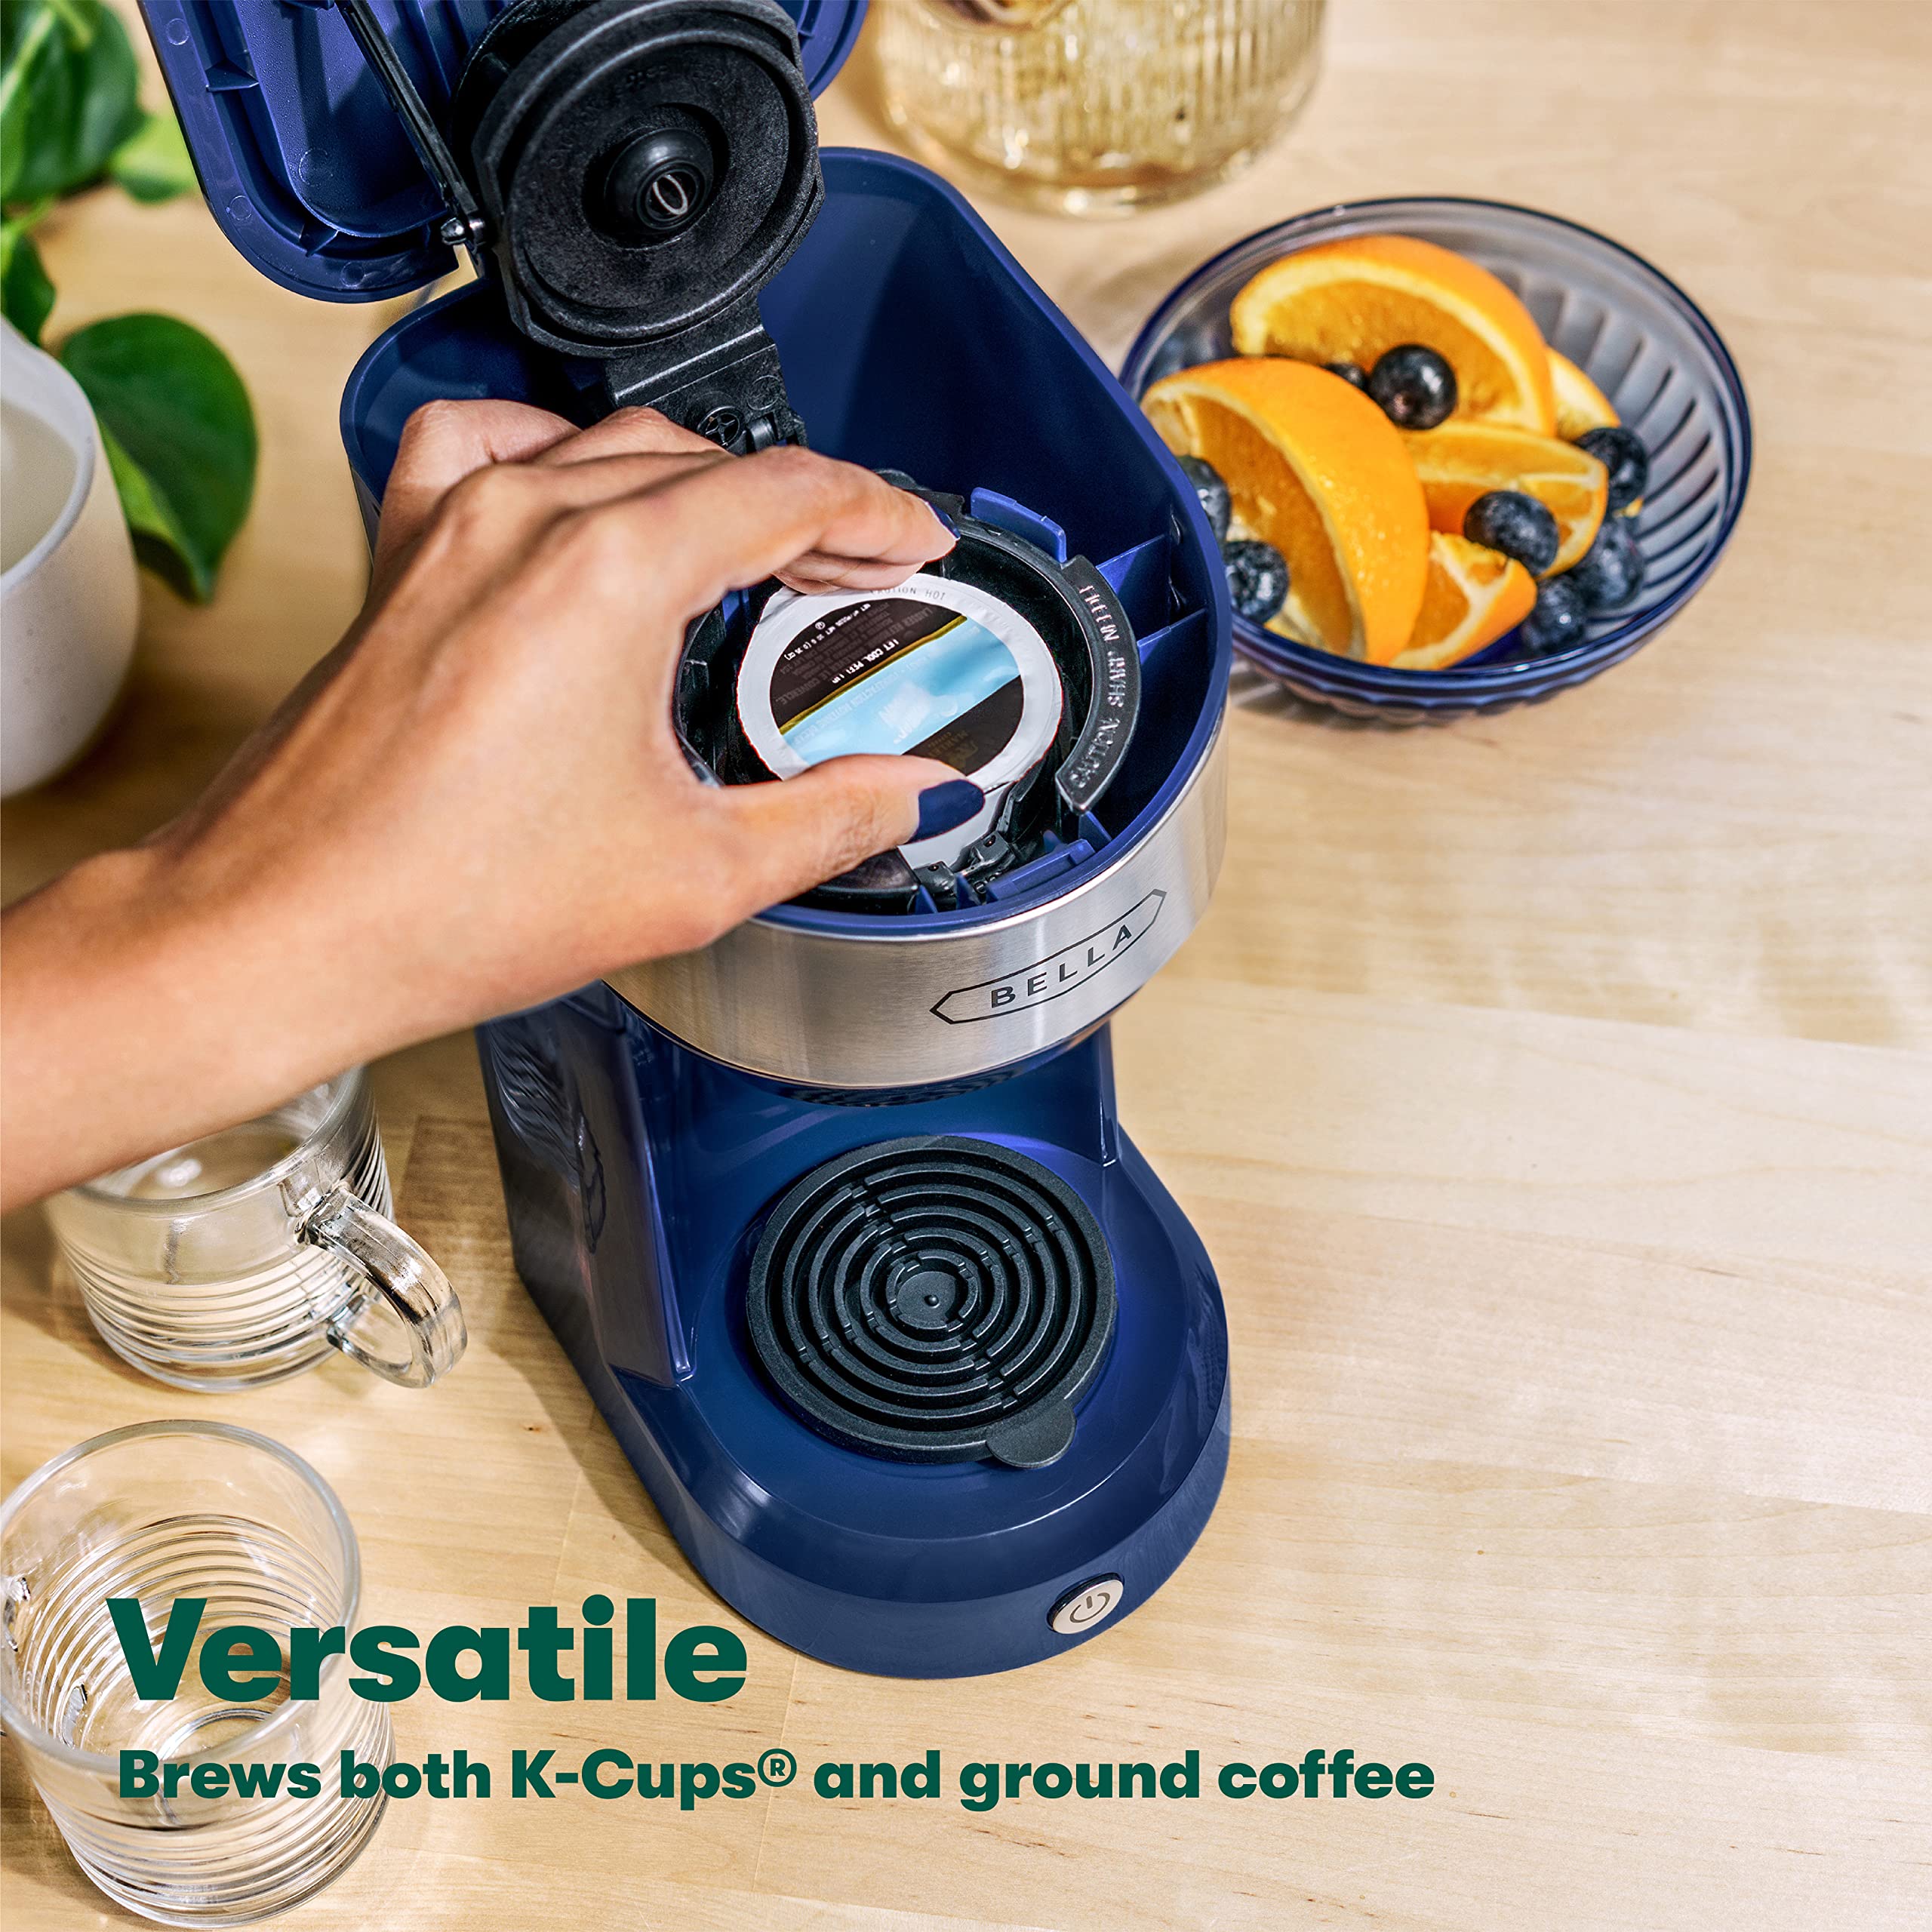 BELLA Dual Brew Single Serve Coffee Maker, K-cup Compatible with Ground Coffee Basket & Adapter - Carefree Auto Shut Off & Adjustable Tray, 14oz, Navy